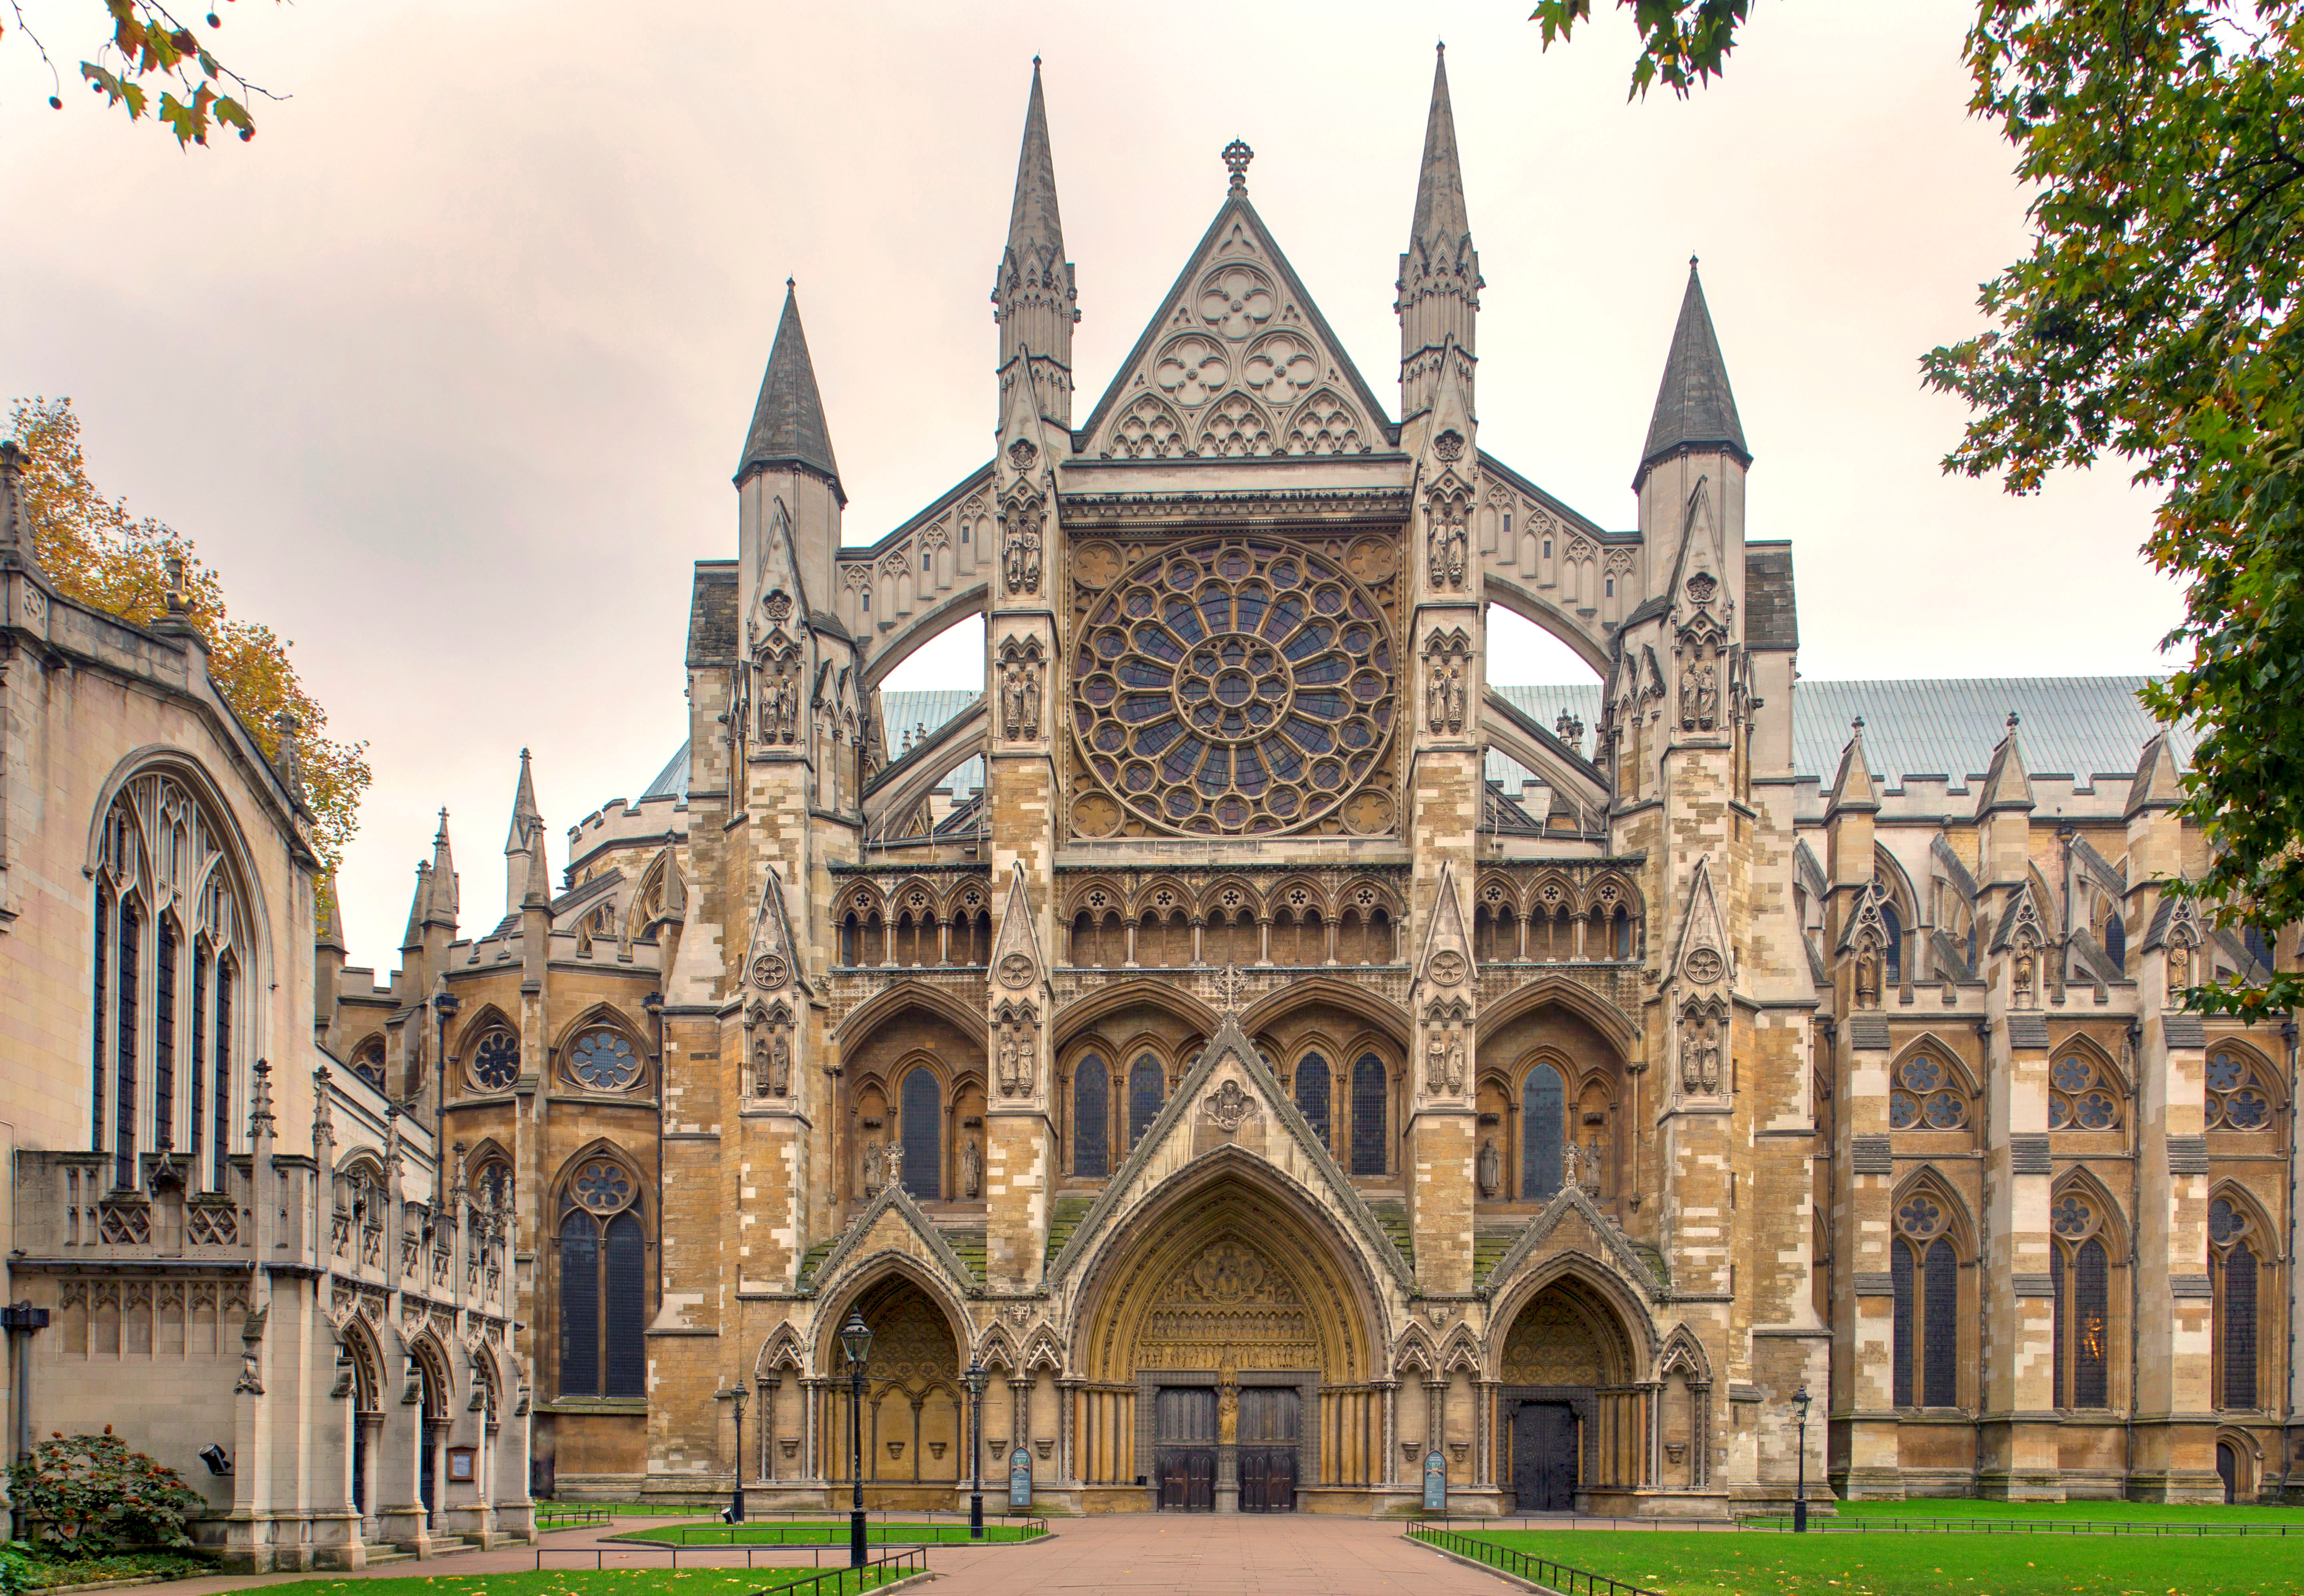 Celebration of the arts at Westminster Abbey | The Arts Society